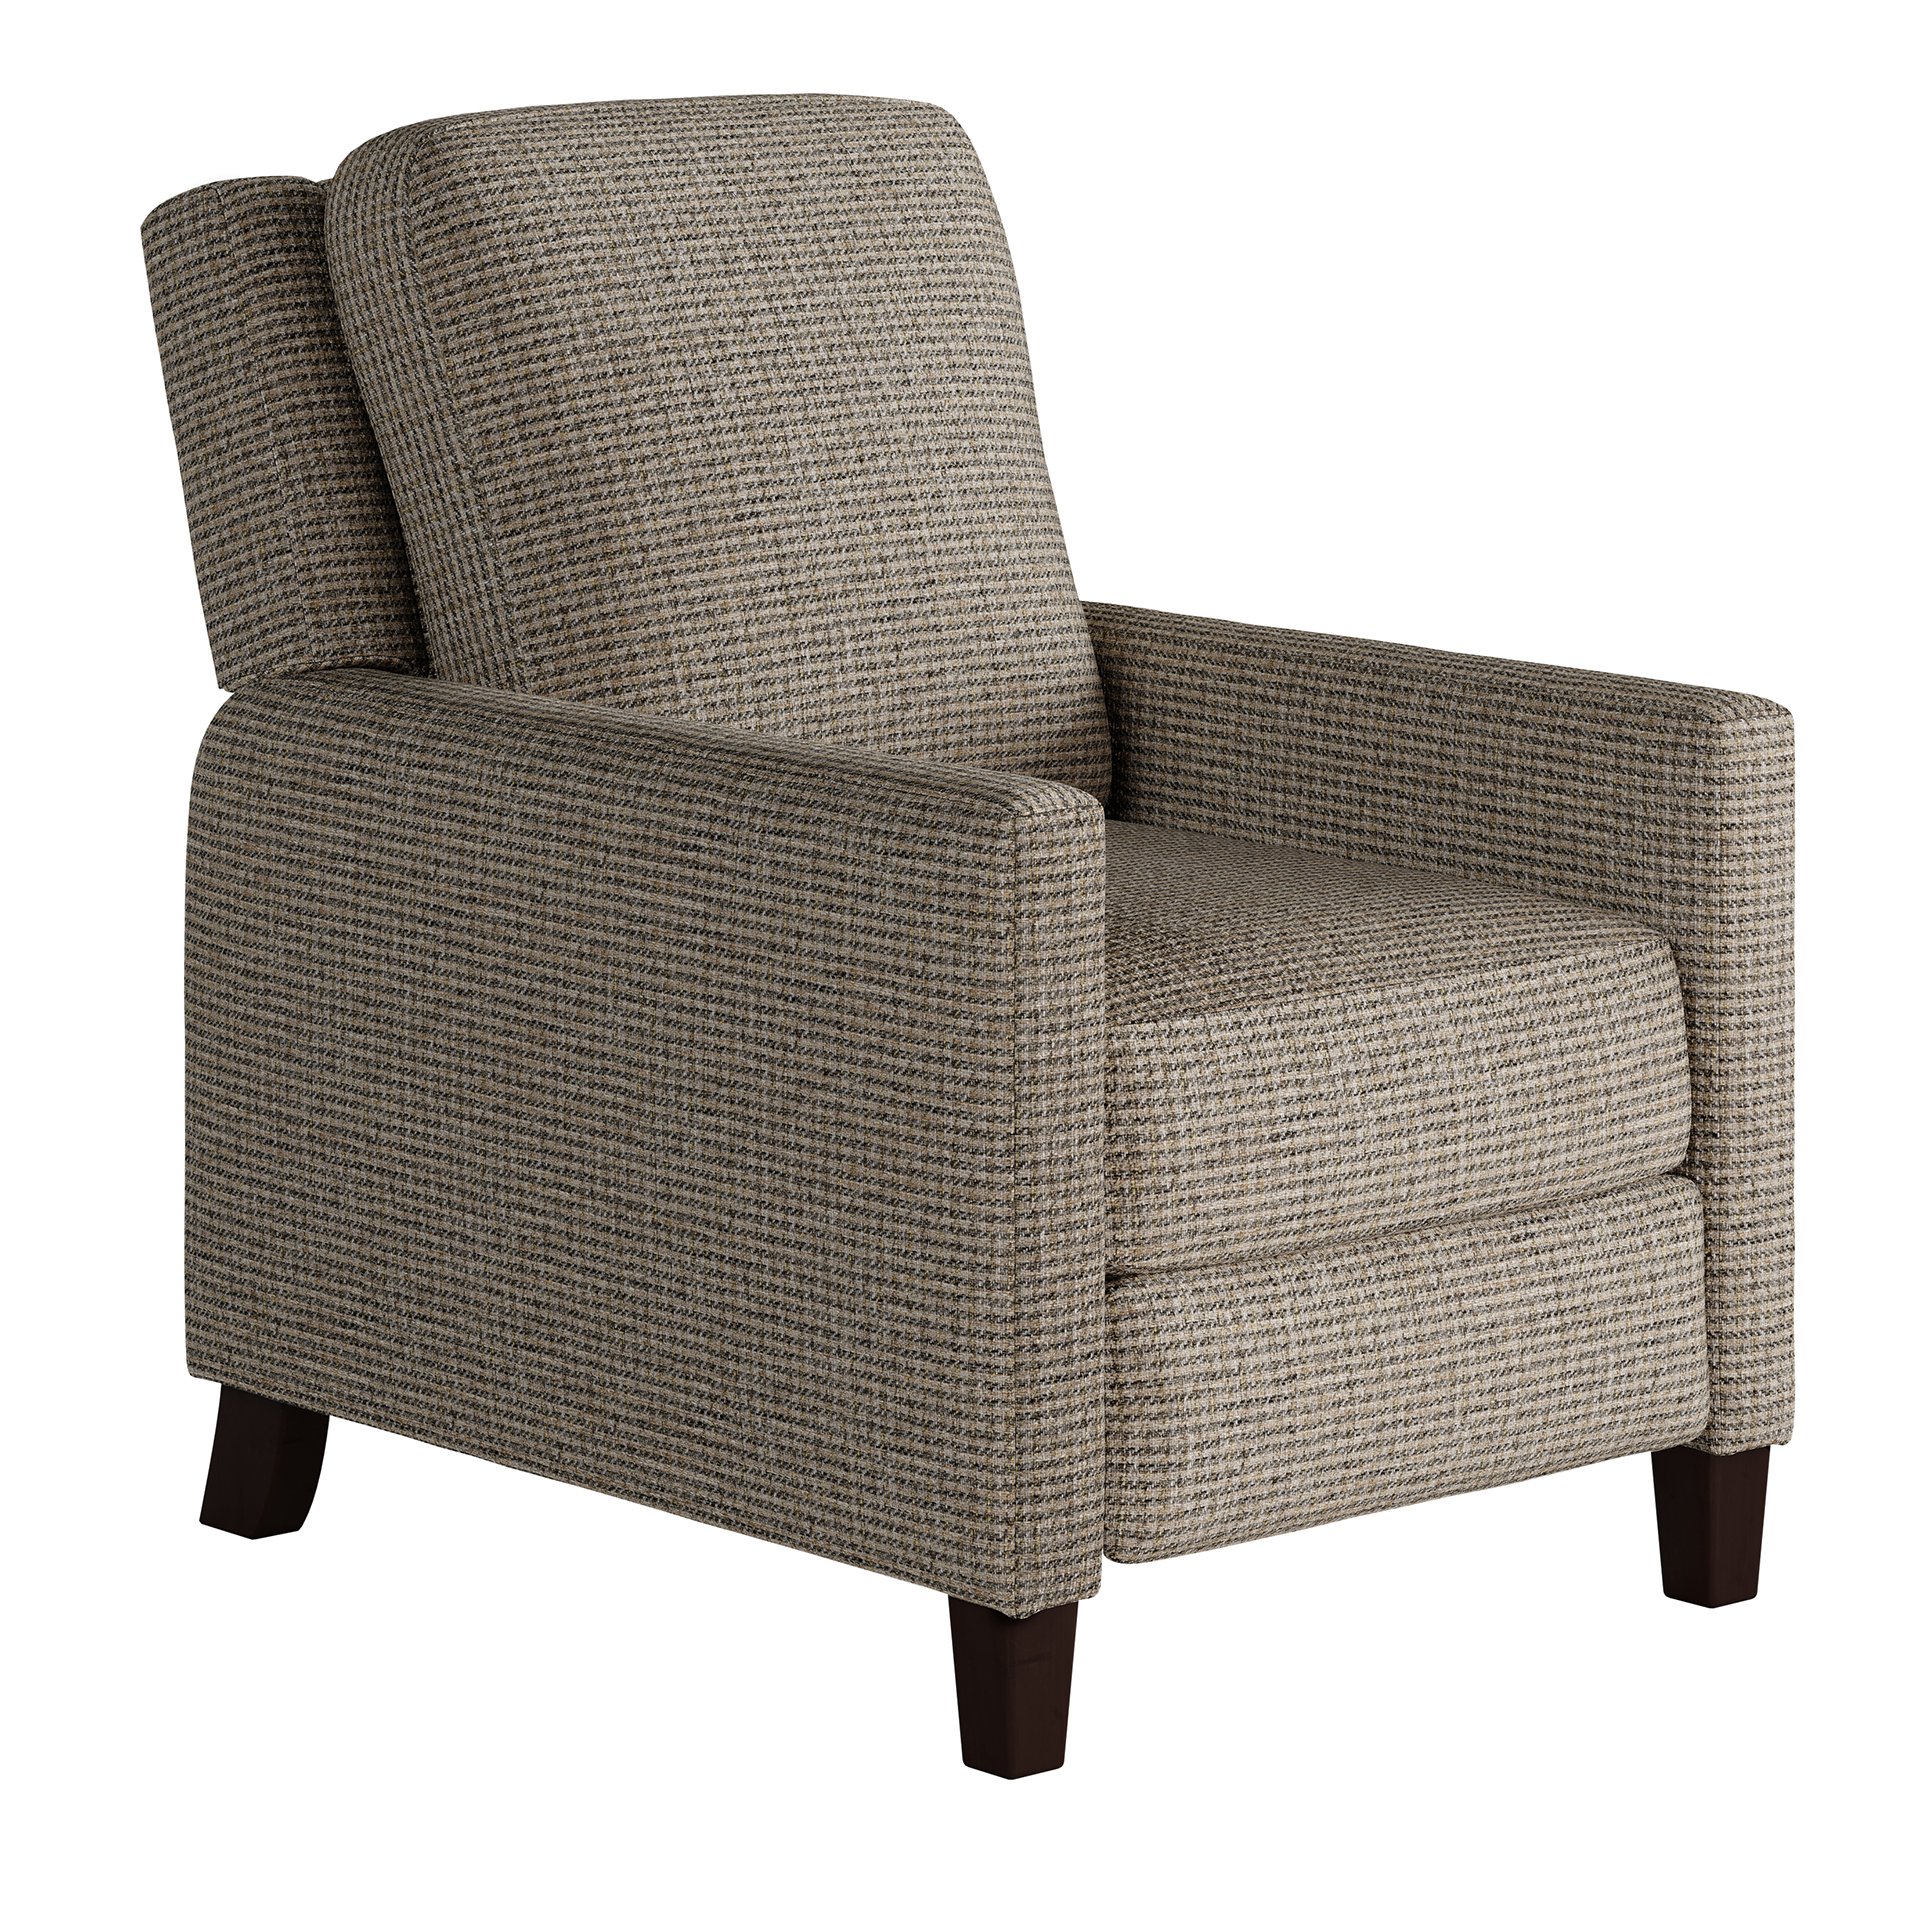 High-Quality Silo 3D Render of Beige Armchair